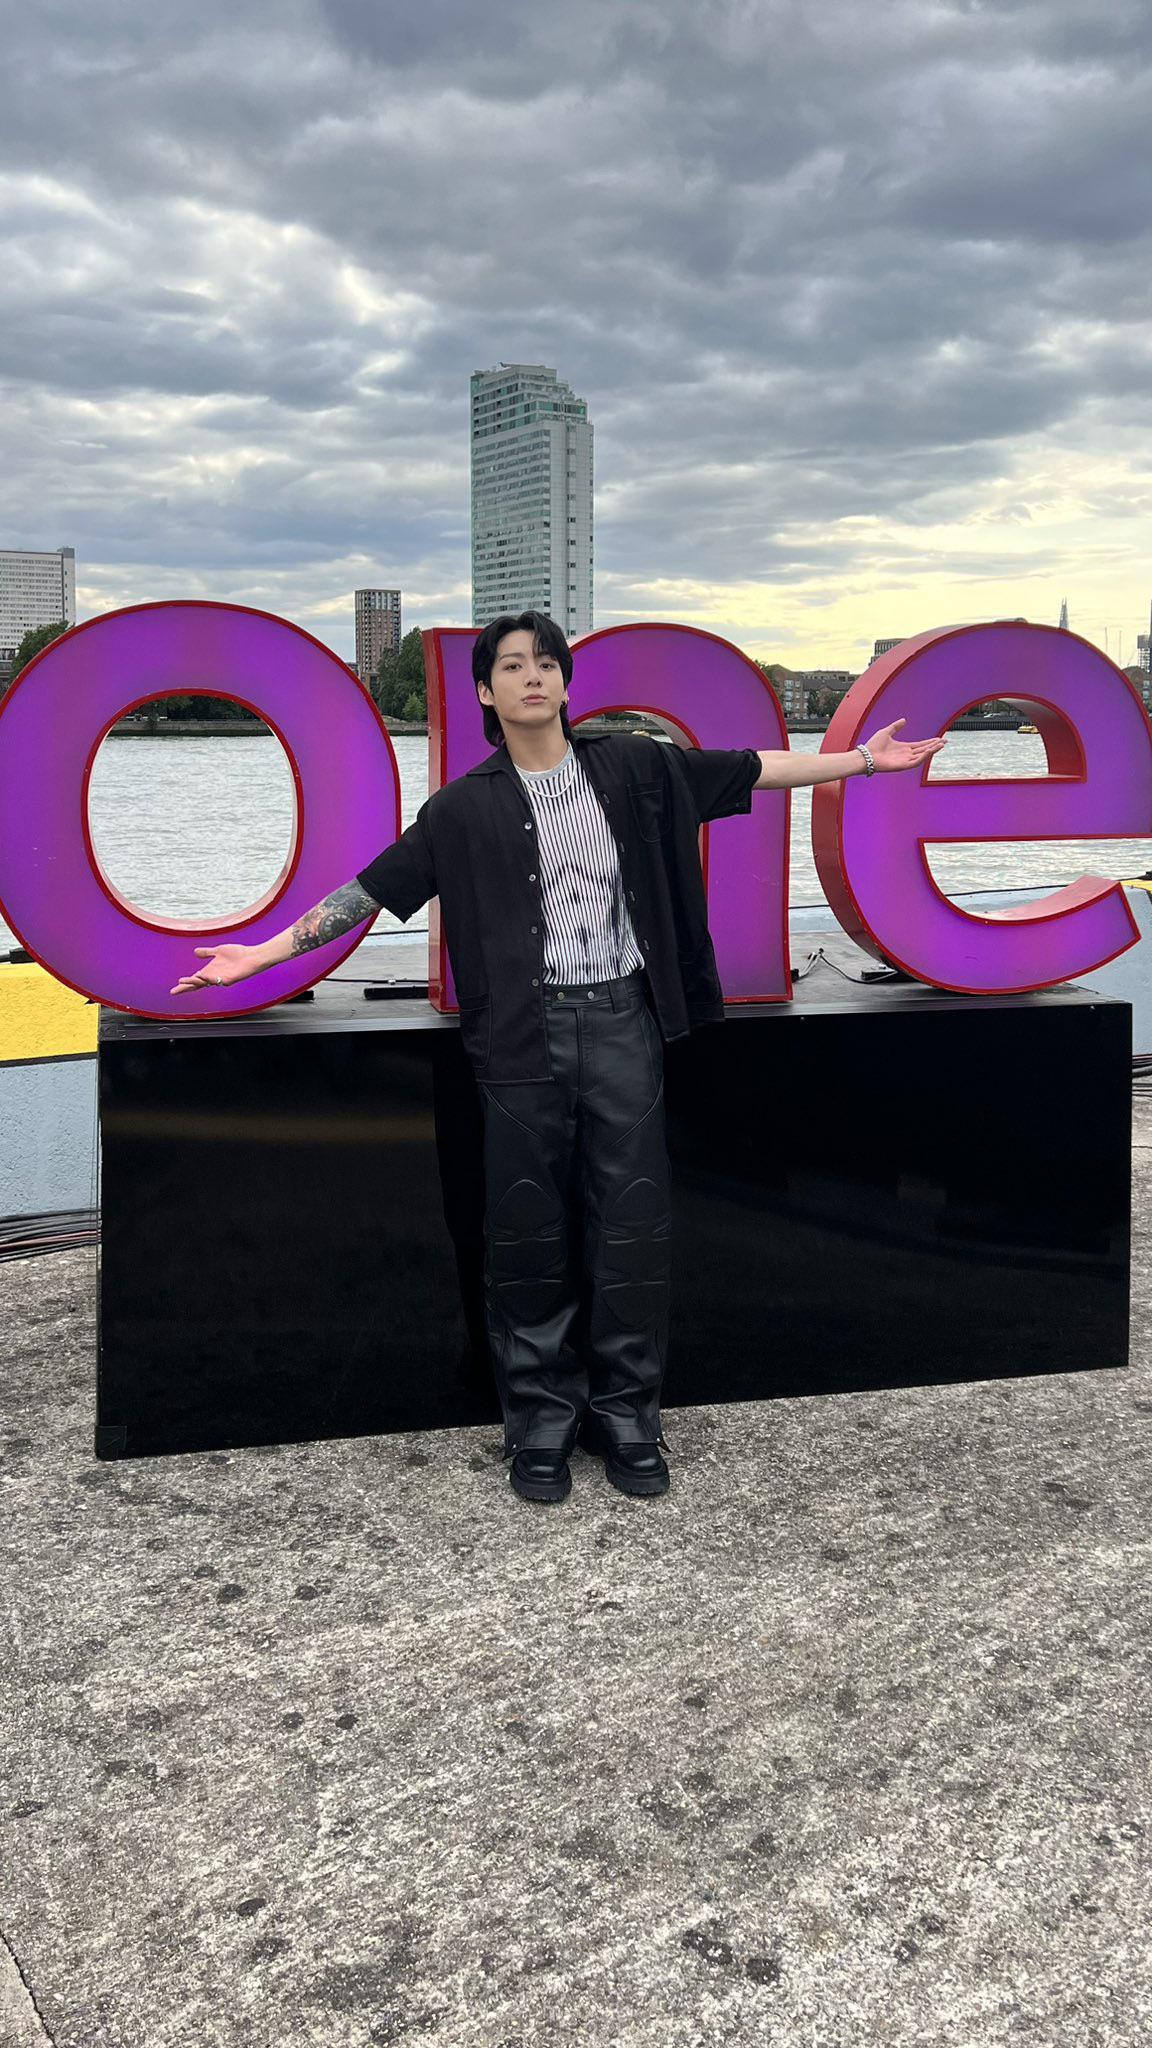 [BBC The One Radio] Jungkook from BTS has arrived at our special location in London! - 220723